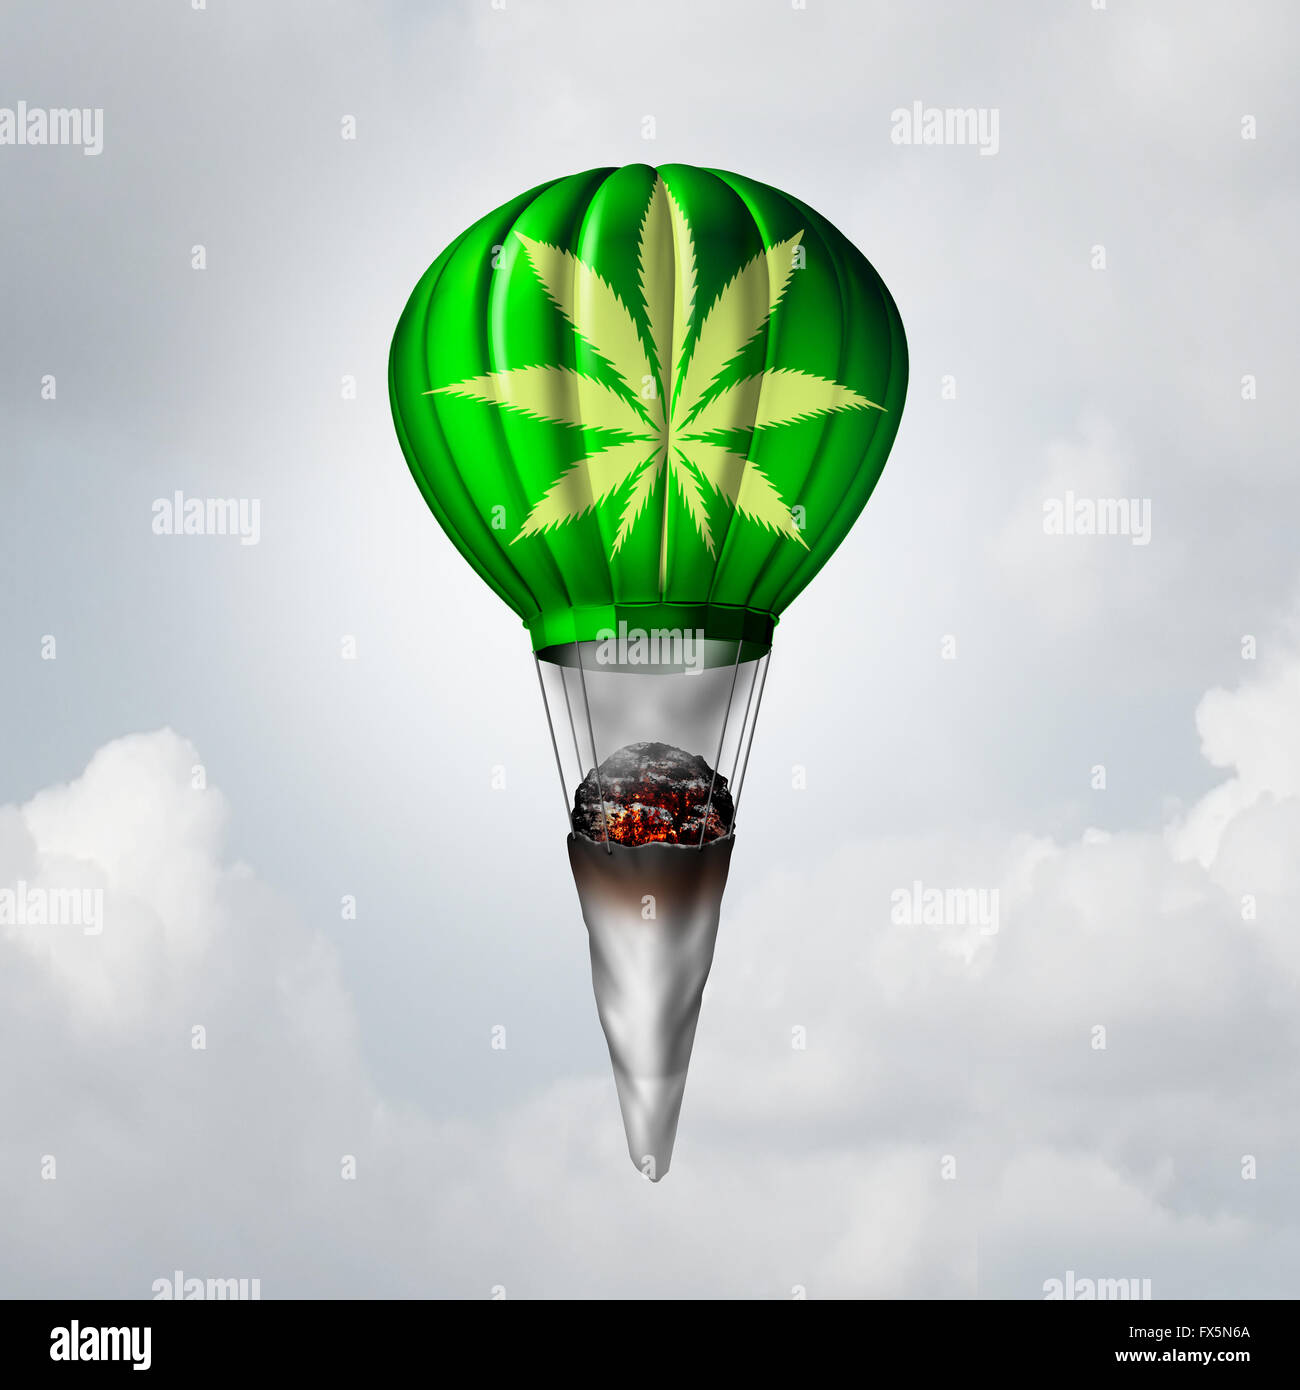 Marijuana joint concept as a rolled pot lit up with smoke coming out and tied to a rising 3D illustration air balloon as a metaphor for getting high on a recreational drug or the rise of medicinal cannabis symbol. Stock Photo